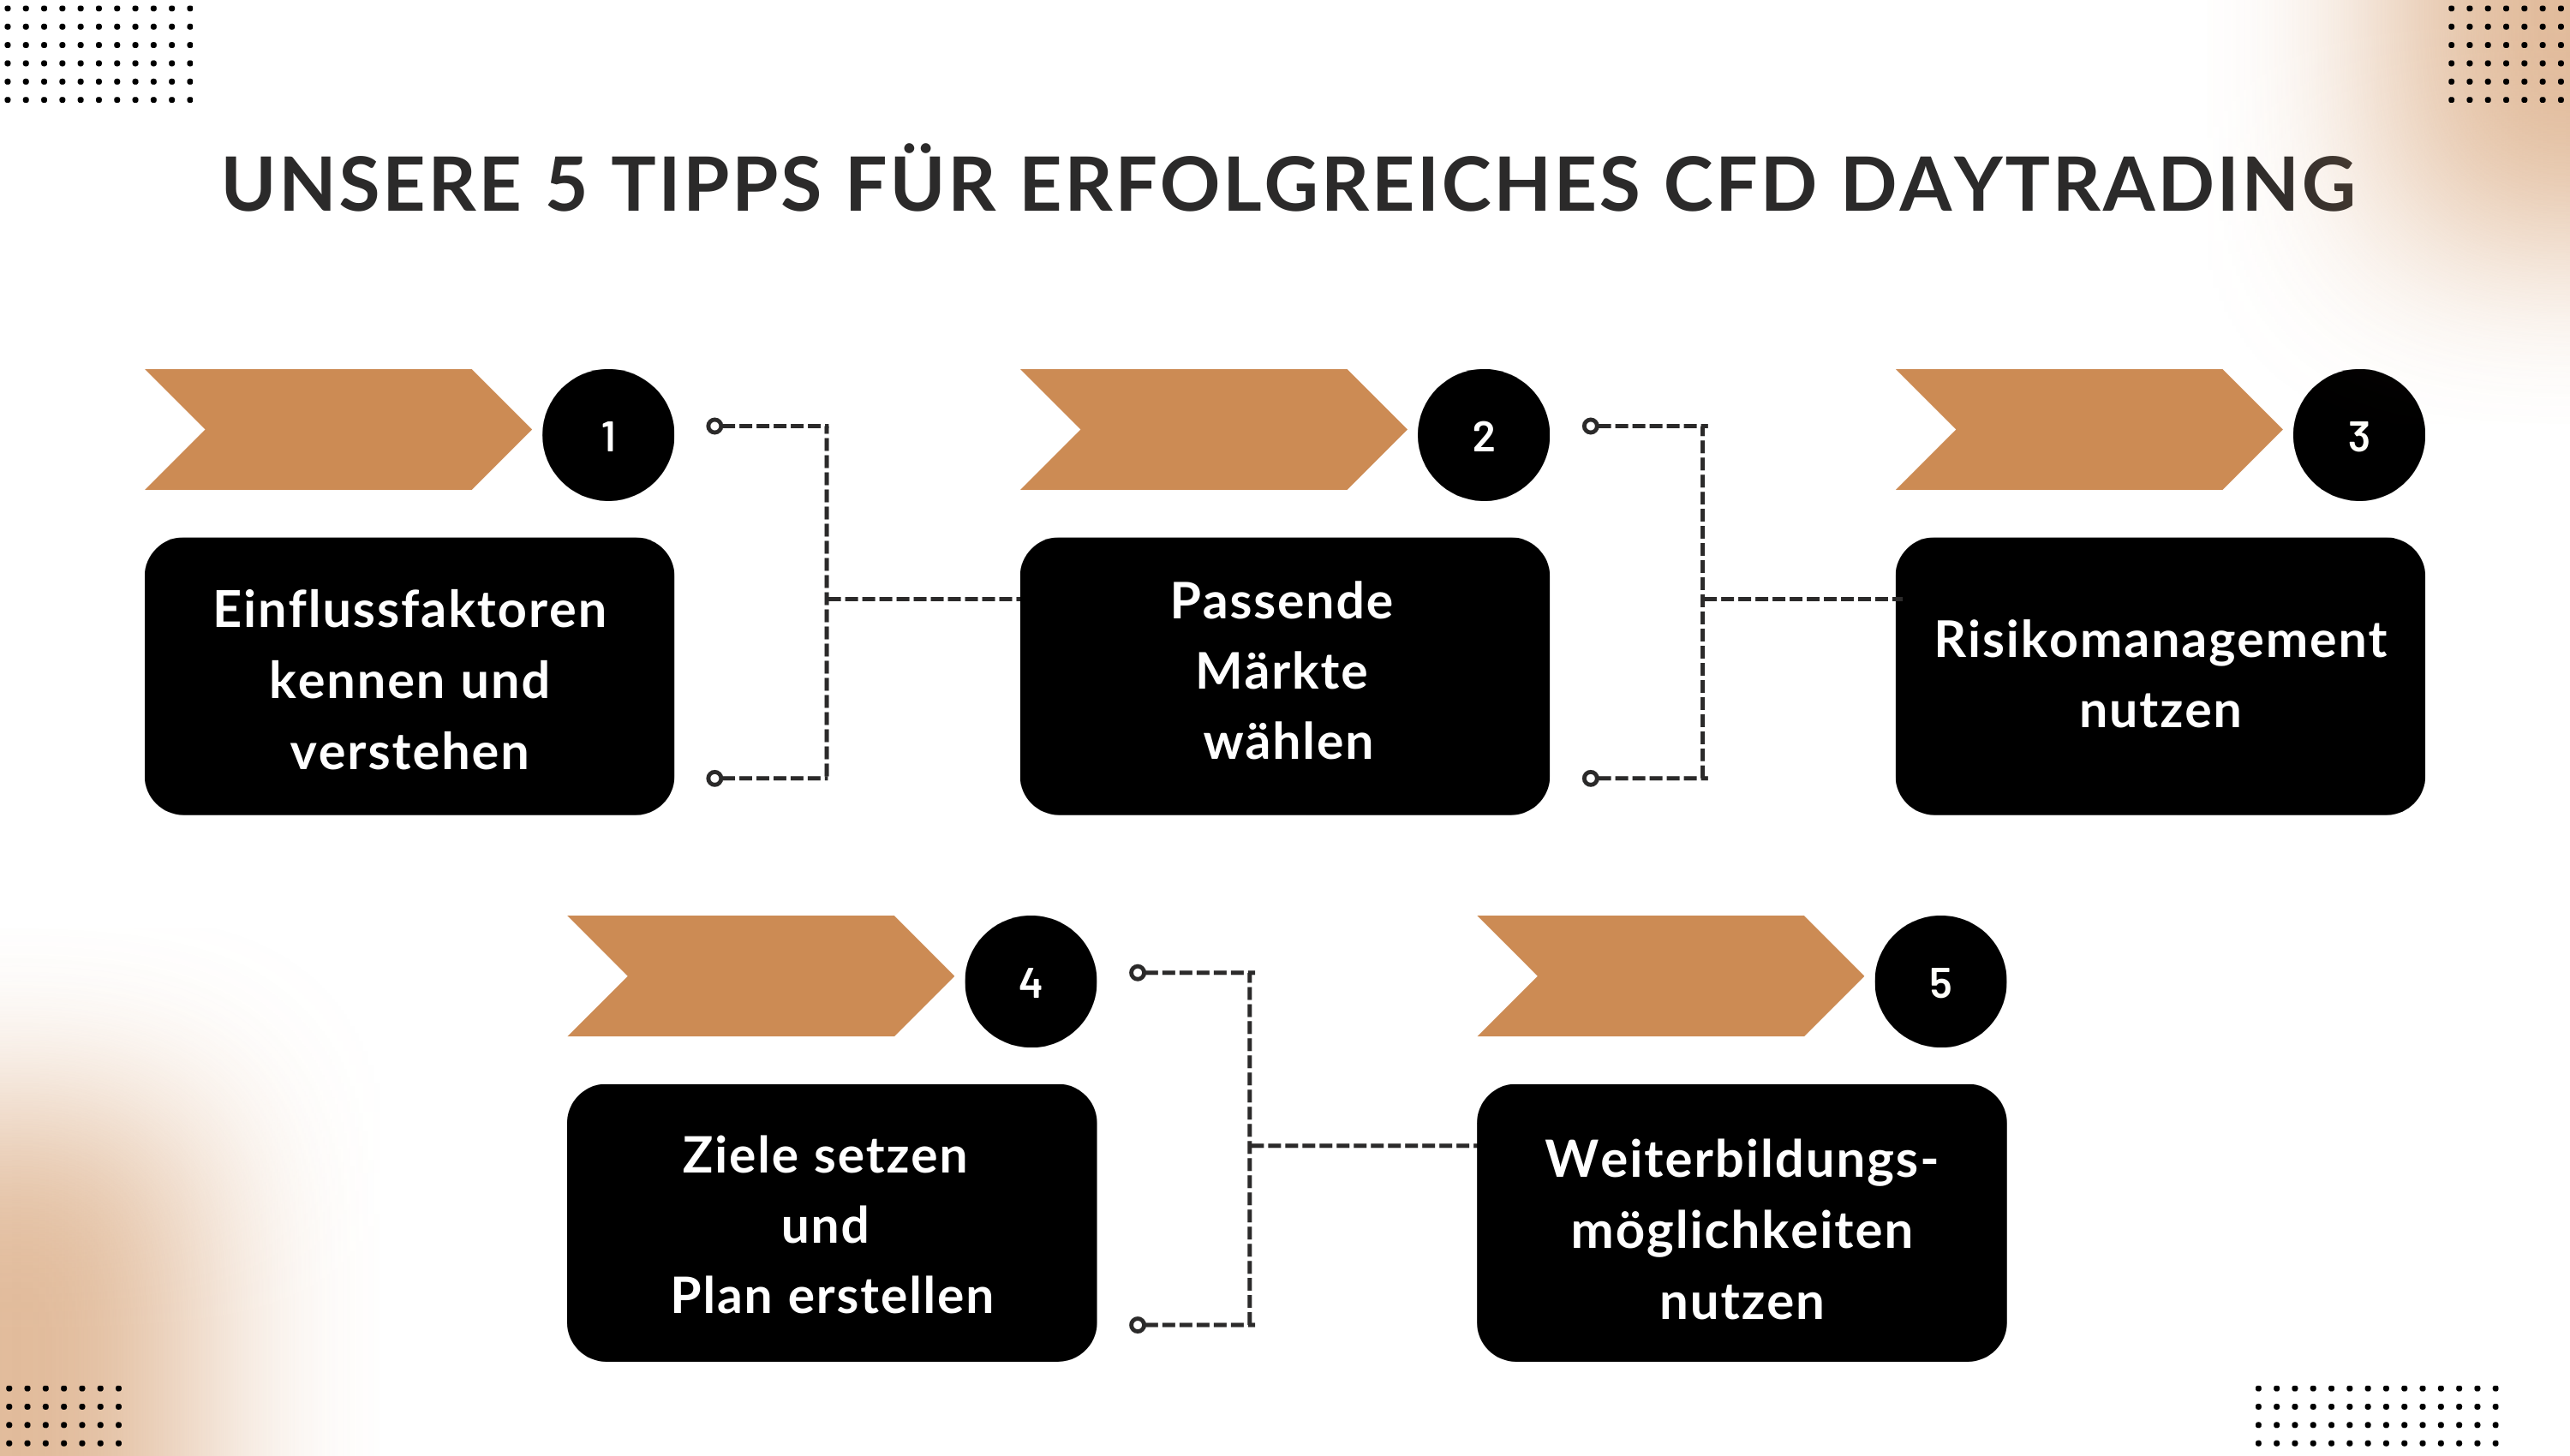 Unsere 5 Tipps für erfolgreiches CFD Daytrading